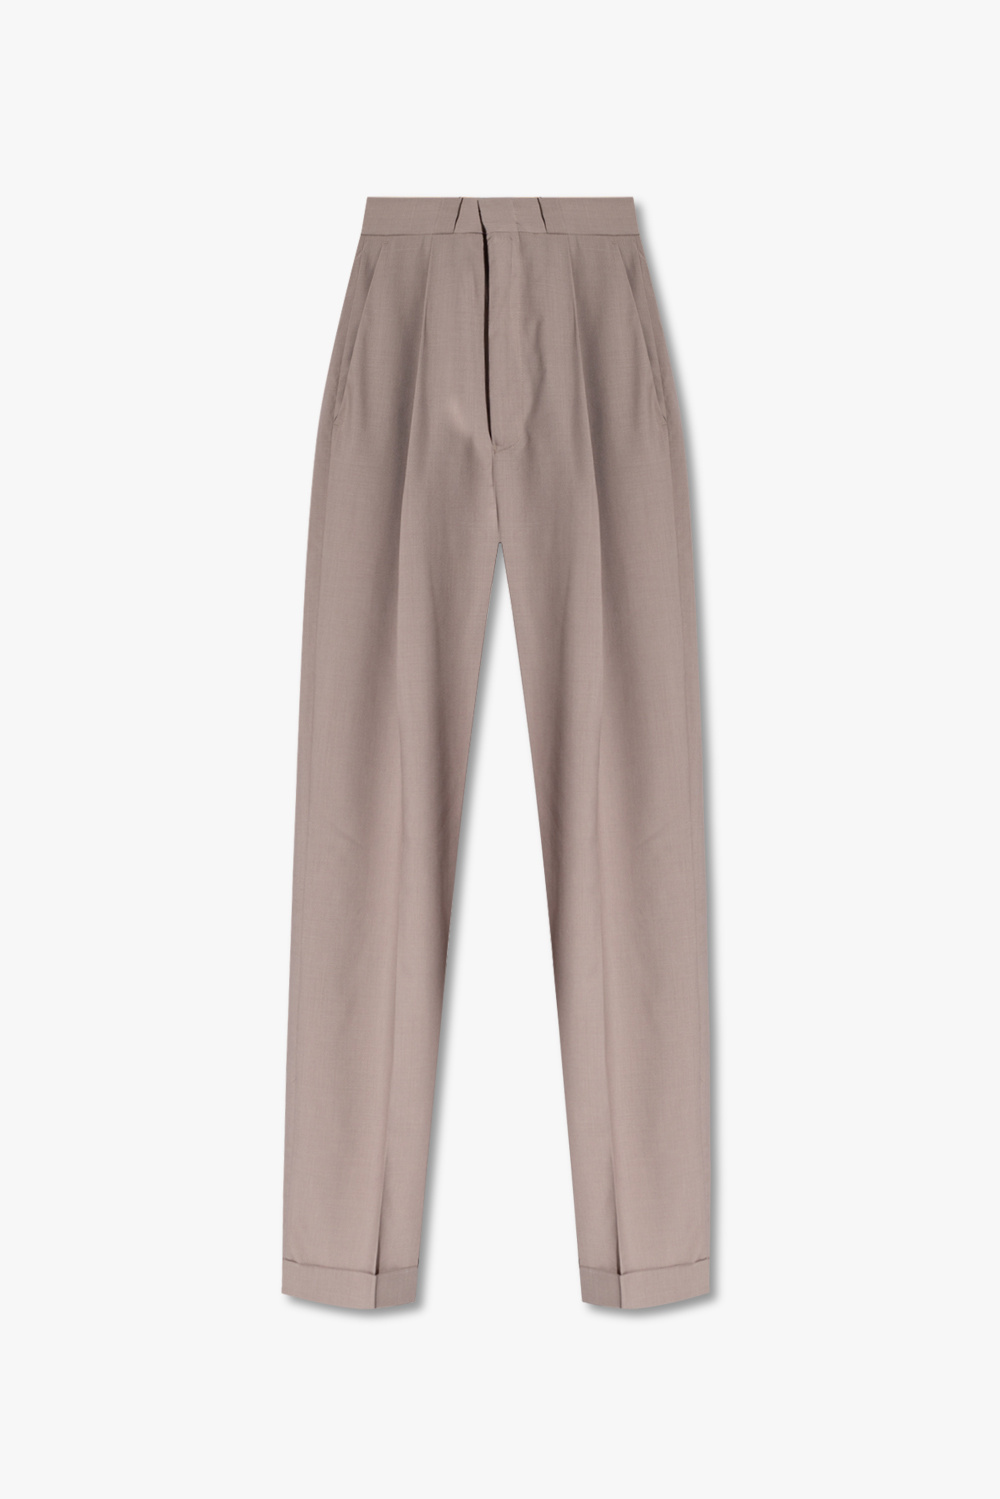 EYTYS ROXY TROUSERS (TAUPE) size26-